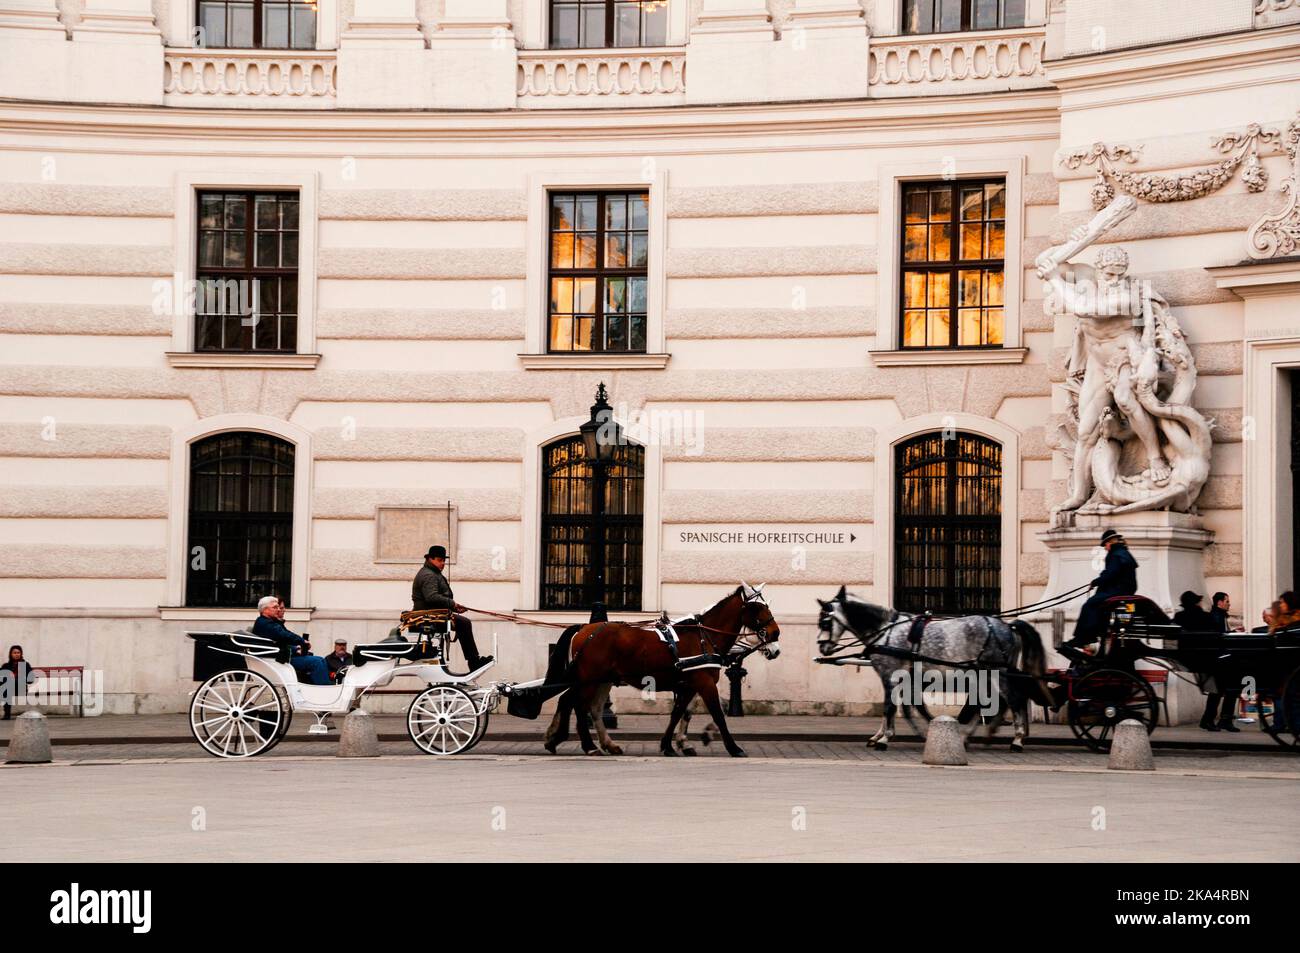 Viennese Fiakers two-horse drawn carriages are a part of the landscape of the capitol city in Austria. Stock Photo